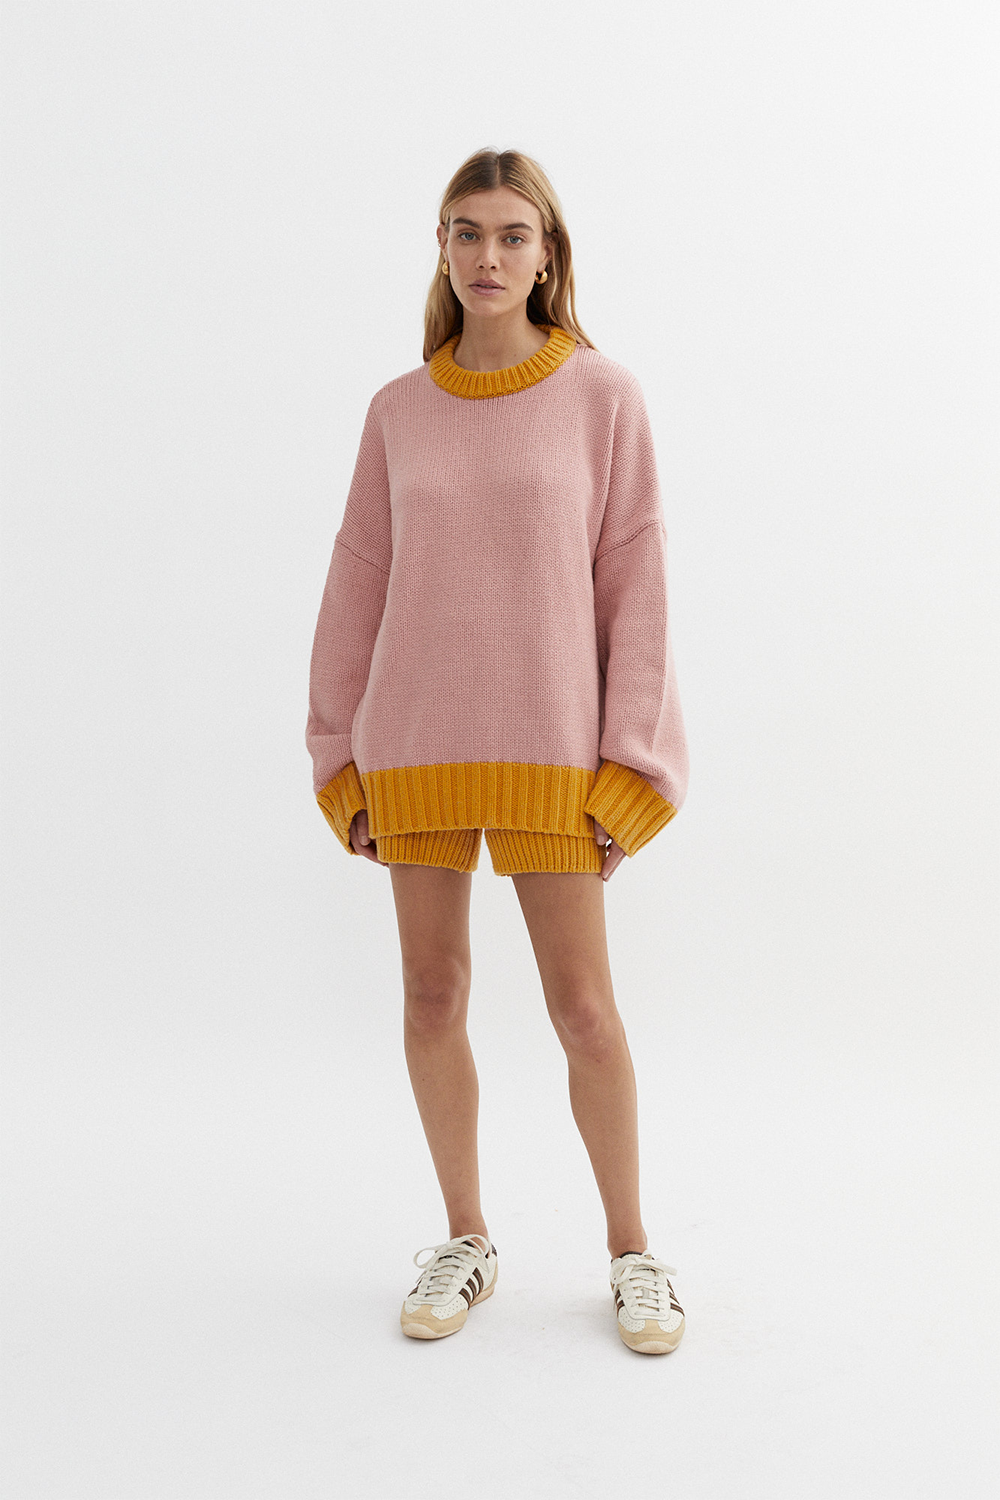 Chambord Knit in Rose